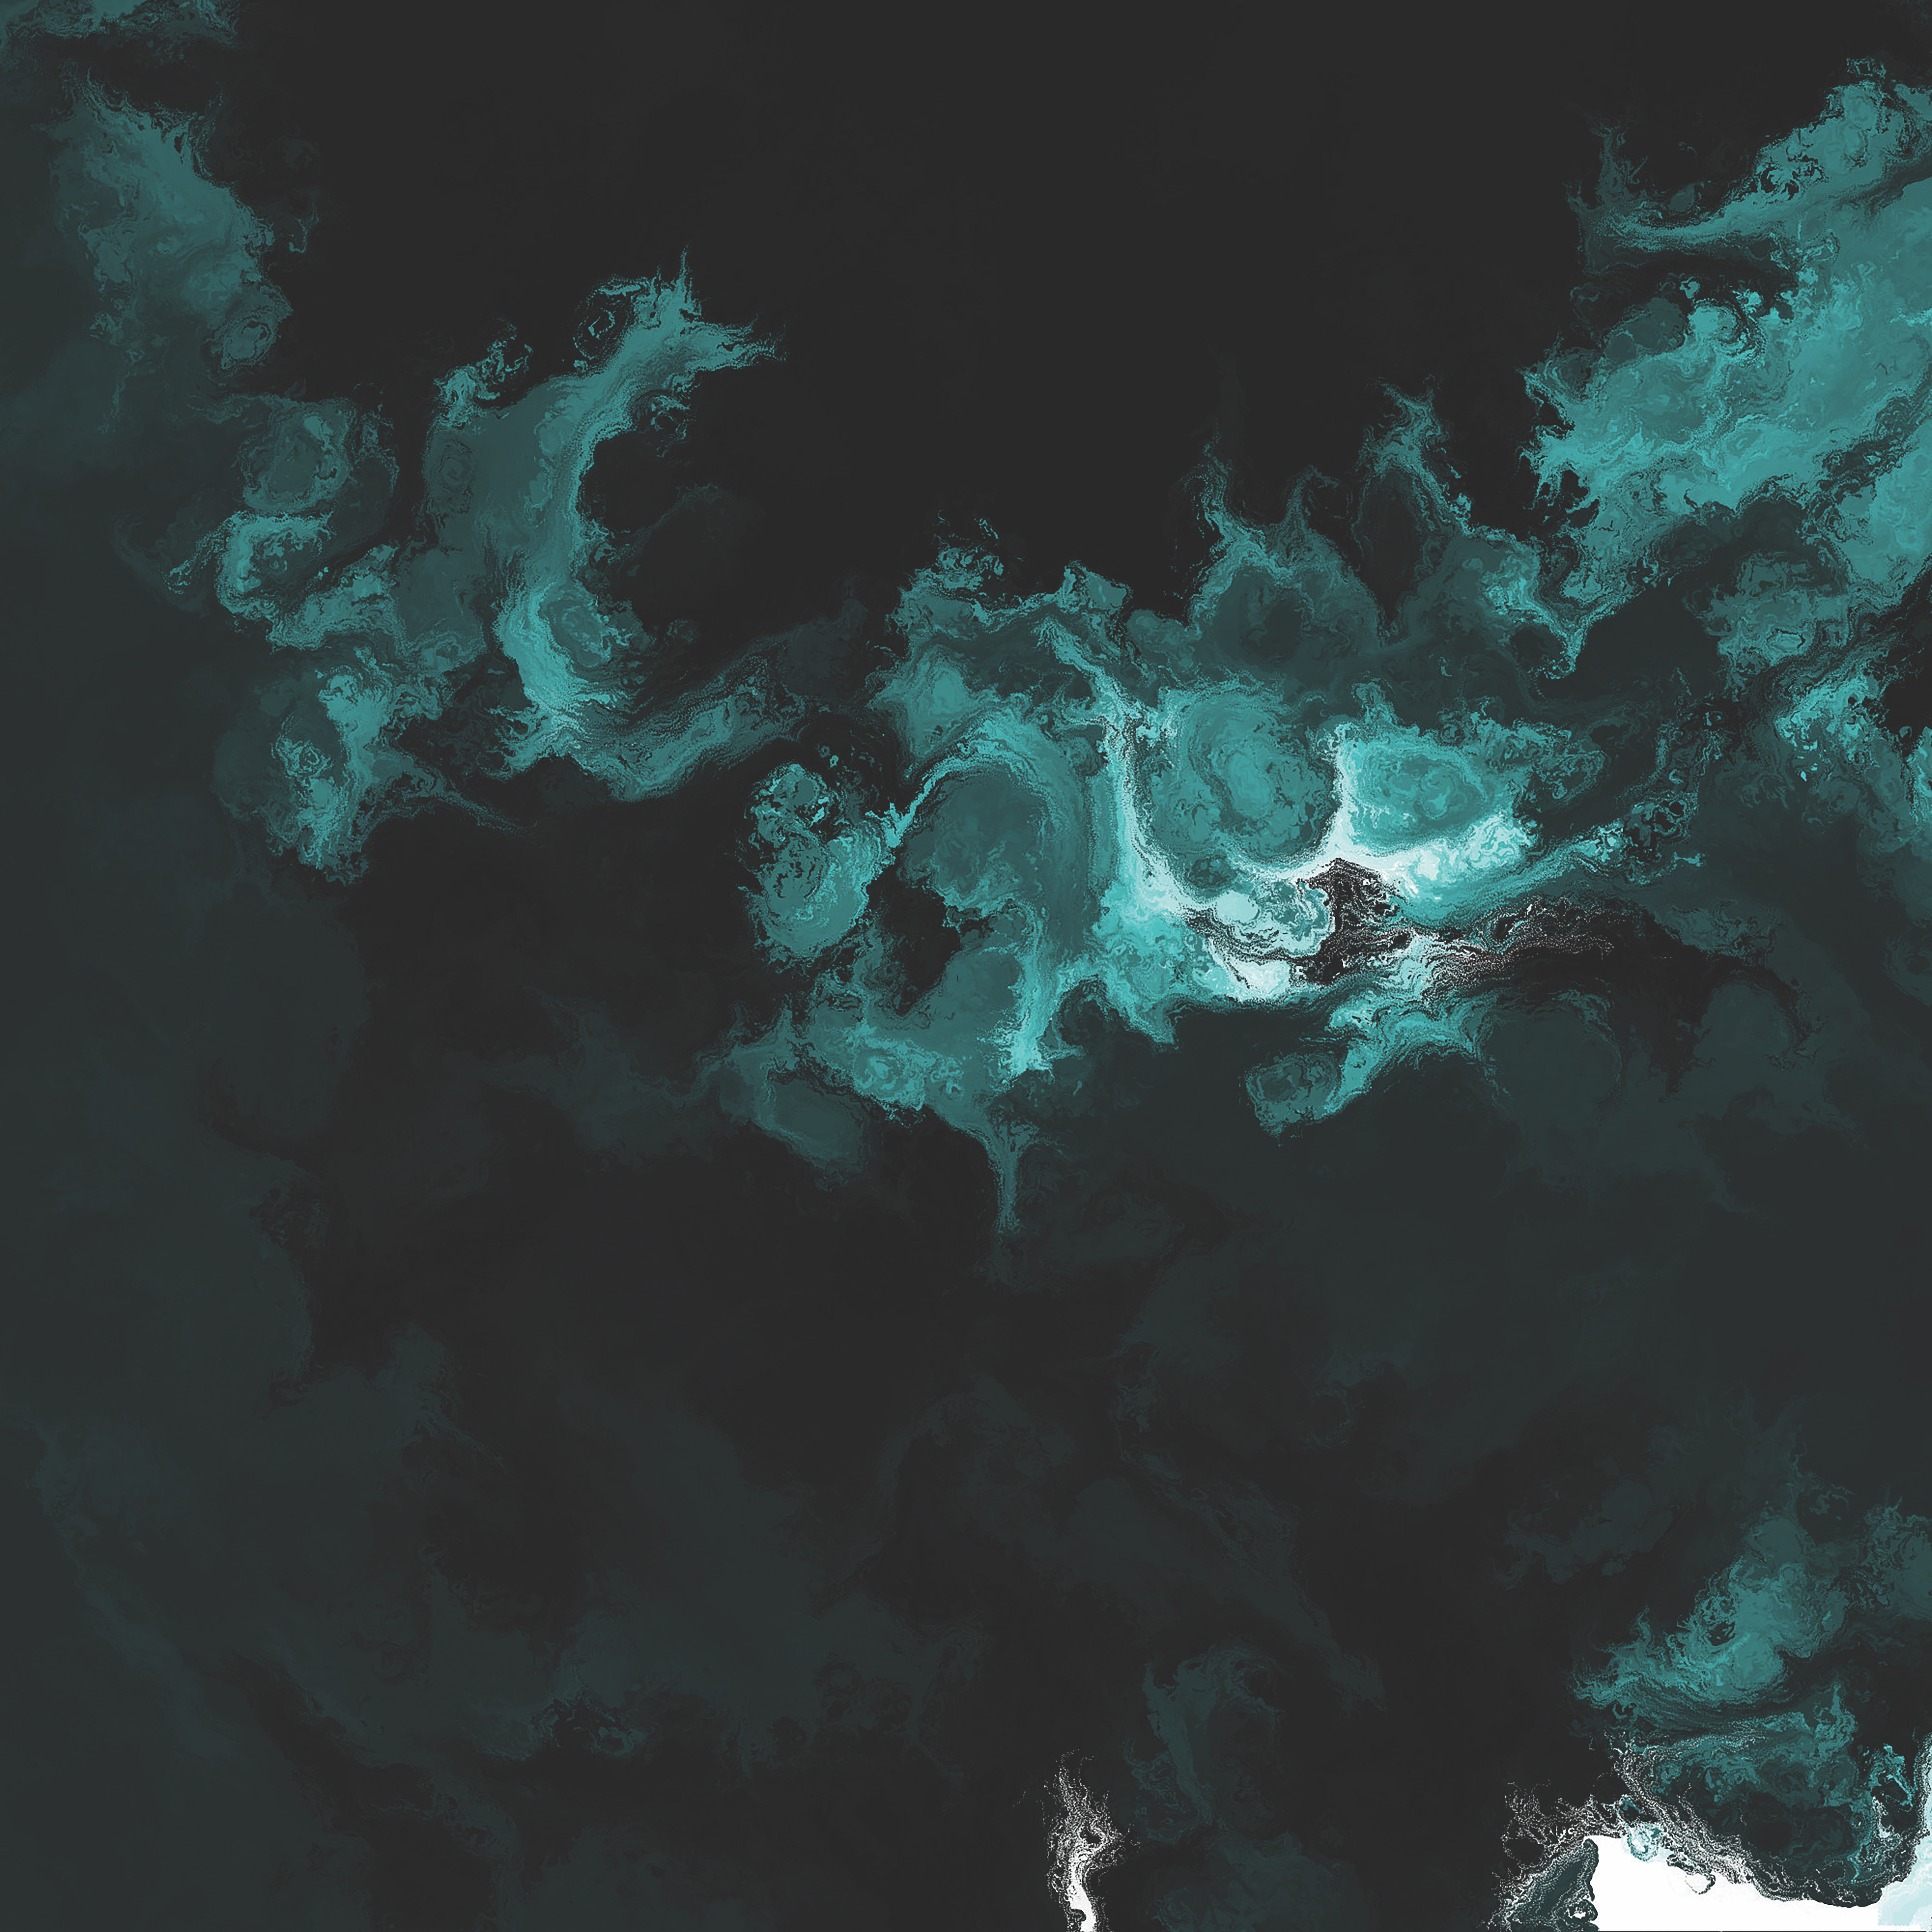 Dark teal/green background, color gradients through light teal to white. Abstract shapes that branch out in wispy ways that look like smoke or poured paint, with white spaces toward the middle of shapes and then light teal branching out to the darker background.